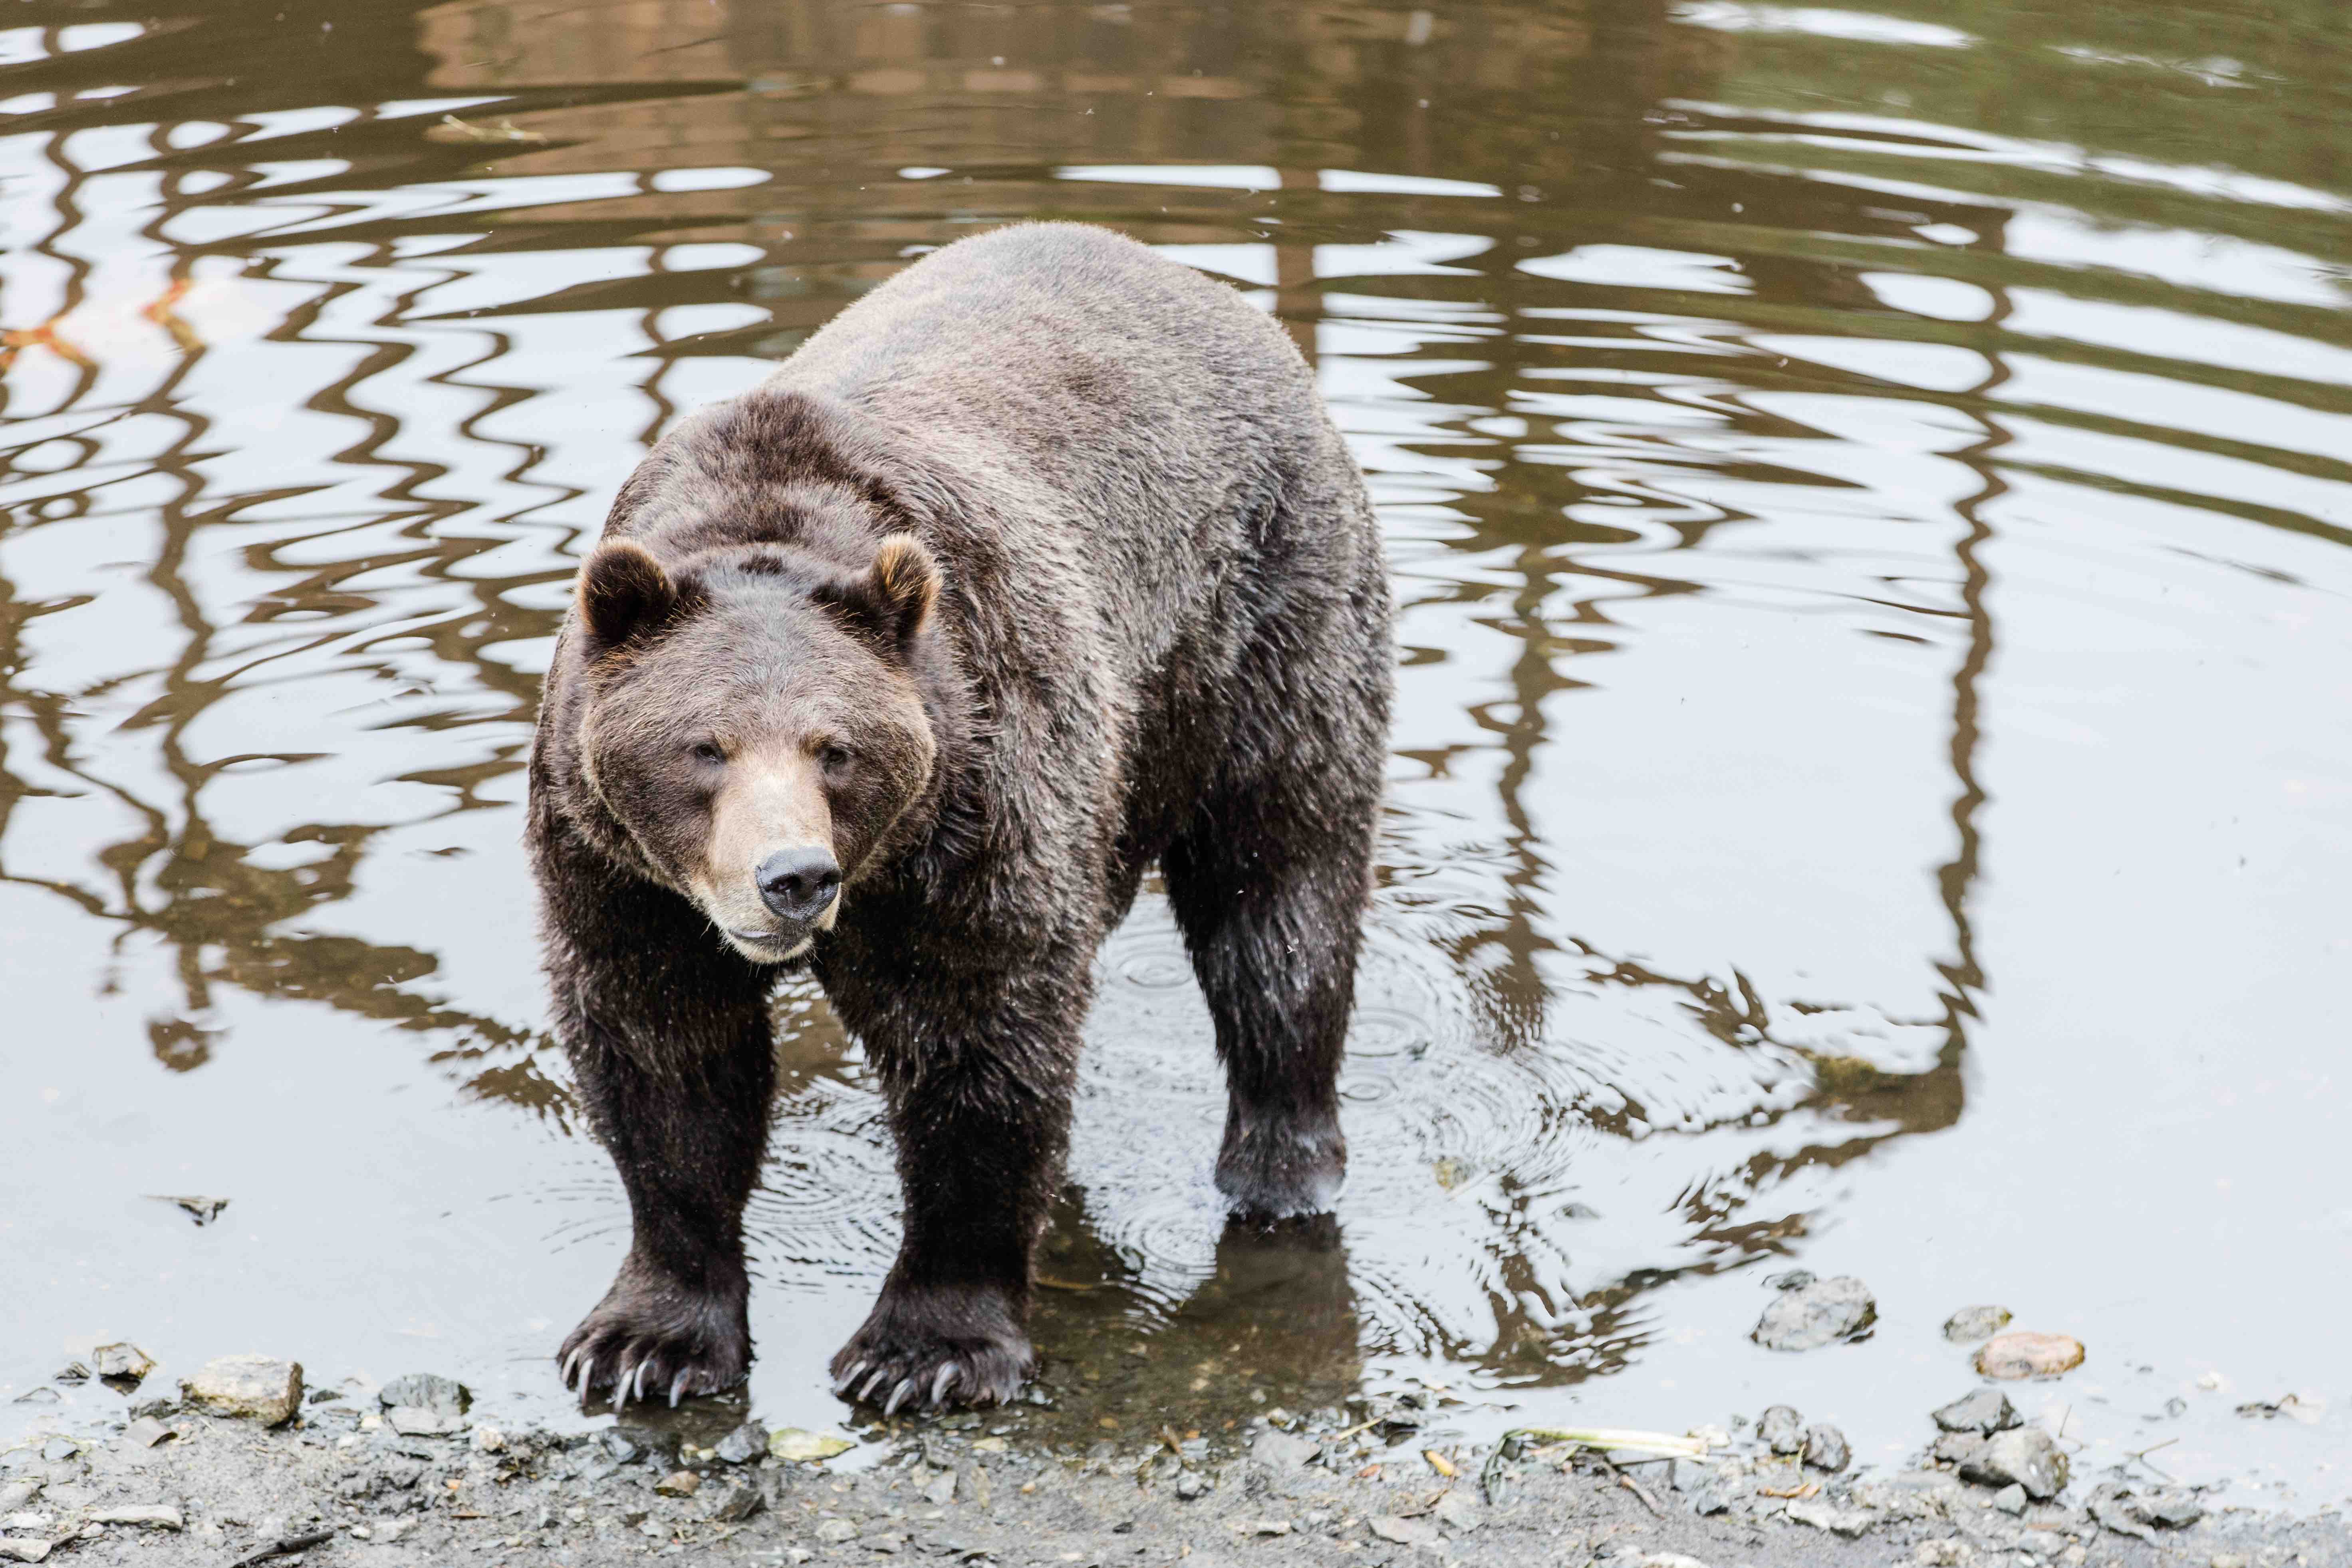 A dark brown grizzly bear looks towards the camera on all fours along the lakeshore.